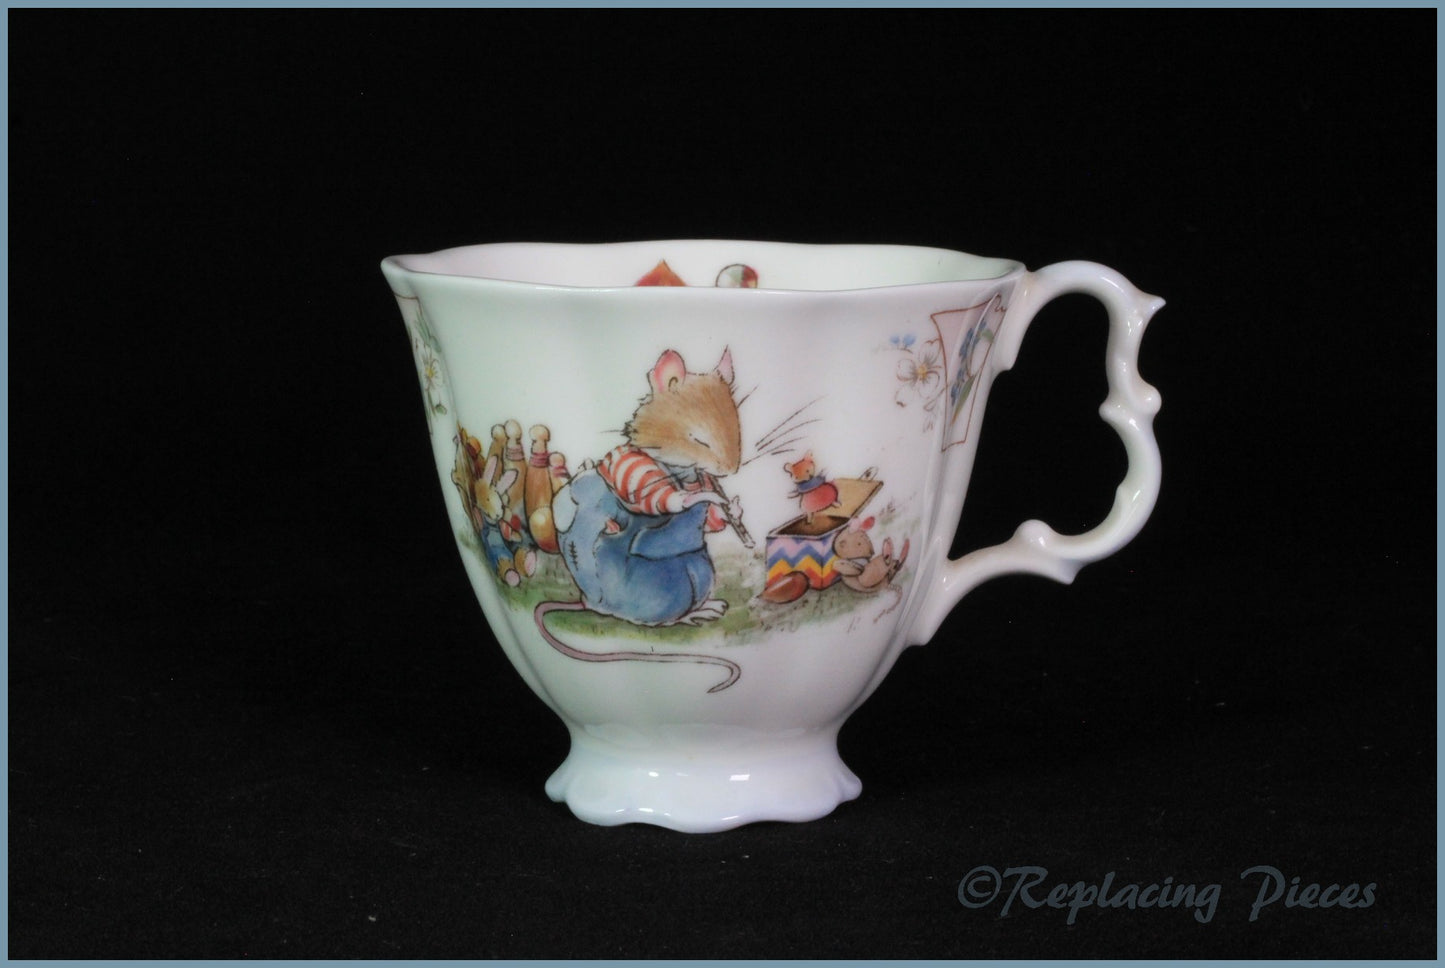 Royal Doulton - Brambly Hedge - Small Teacup (The Birthday)